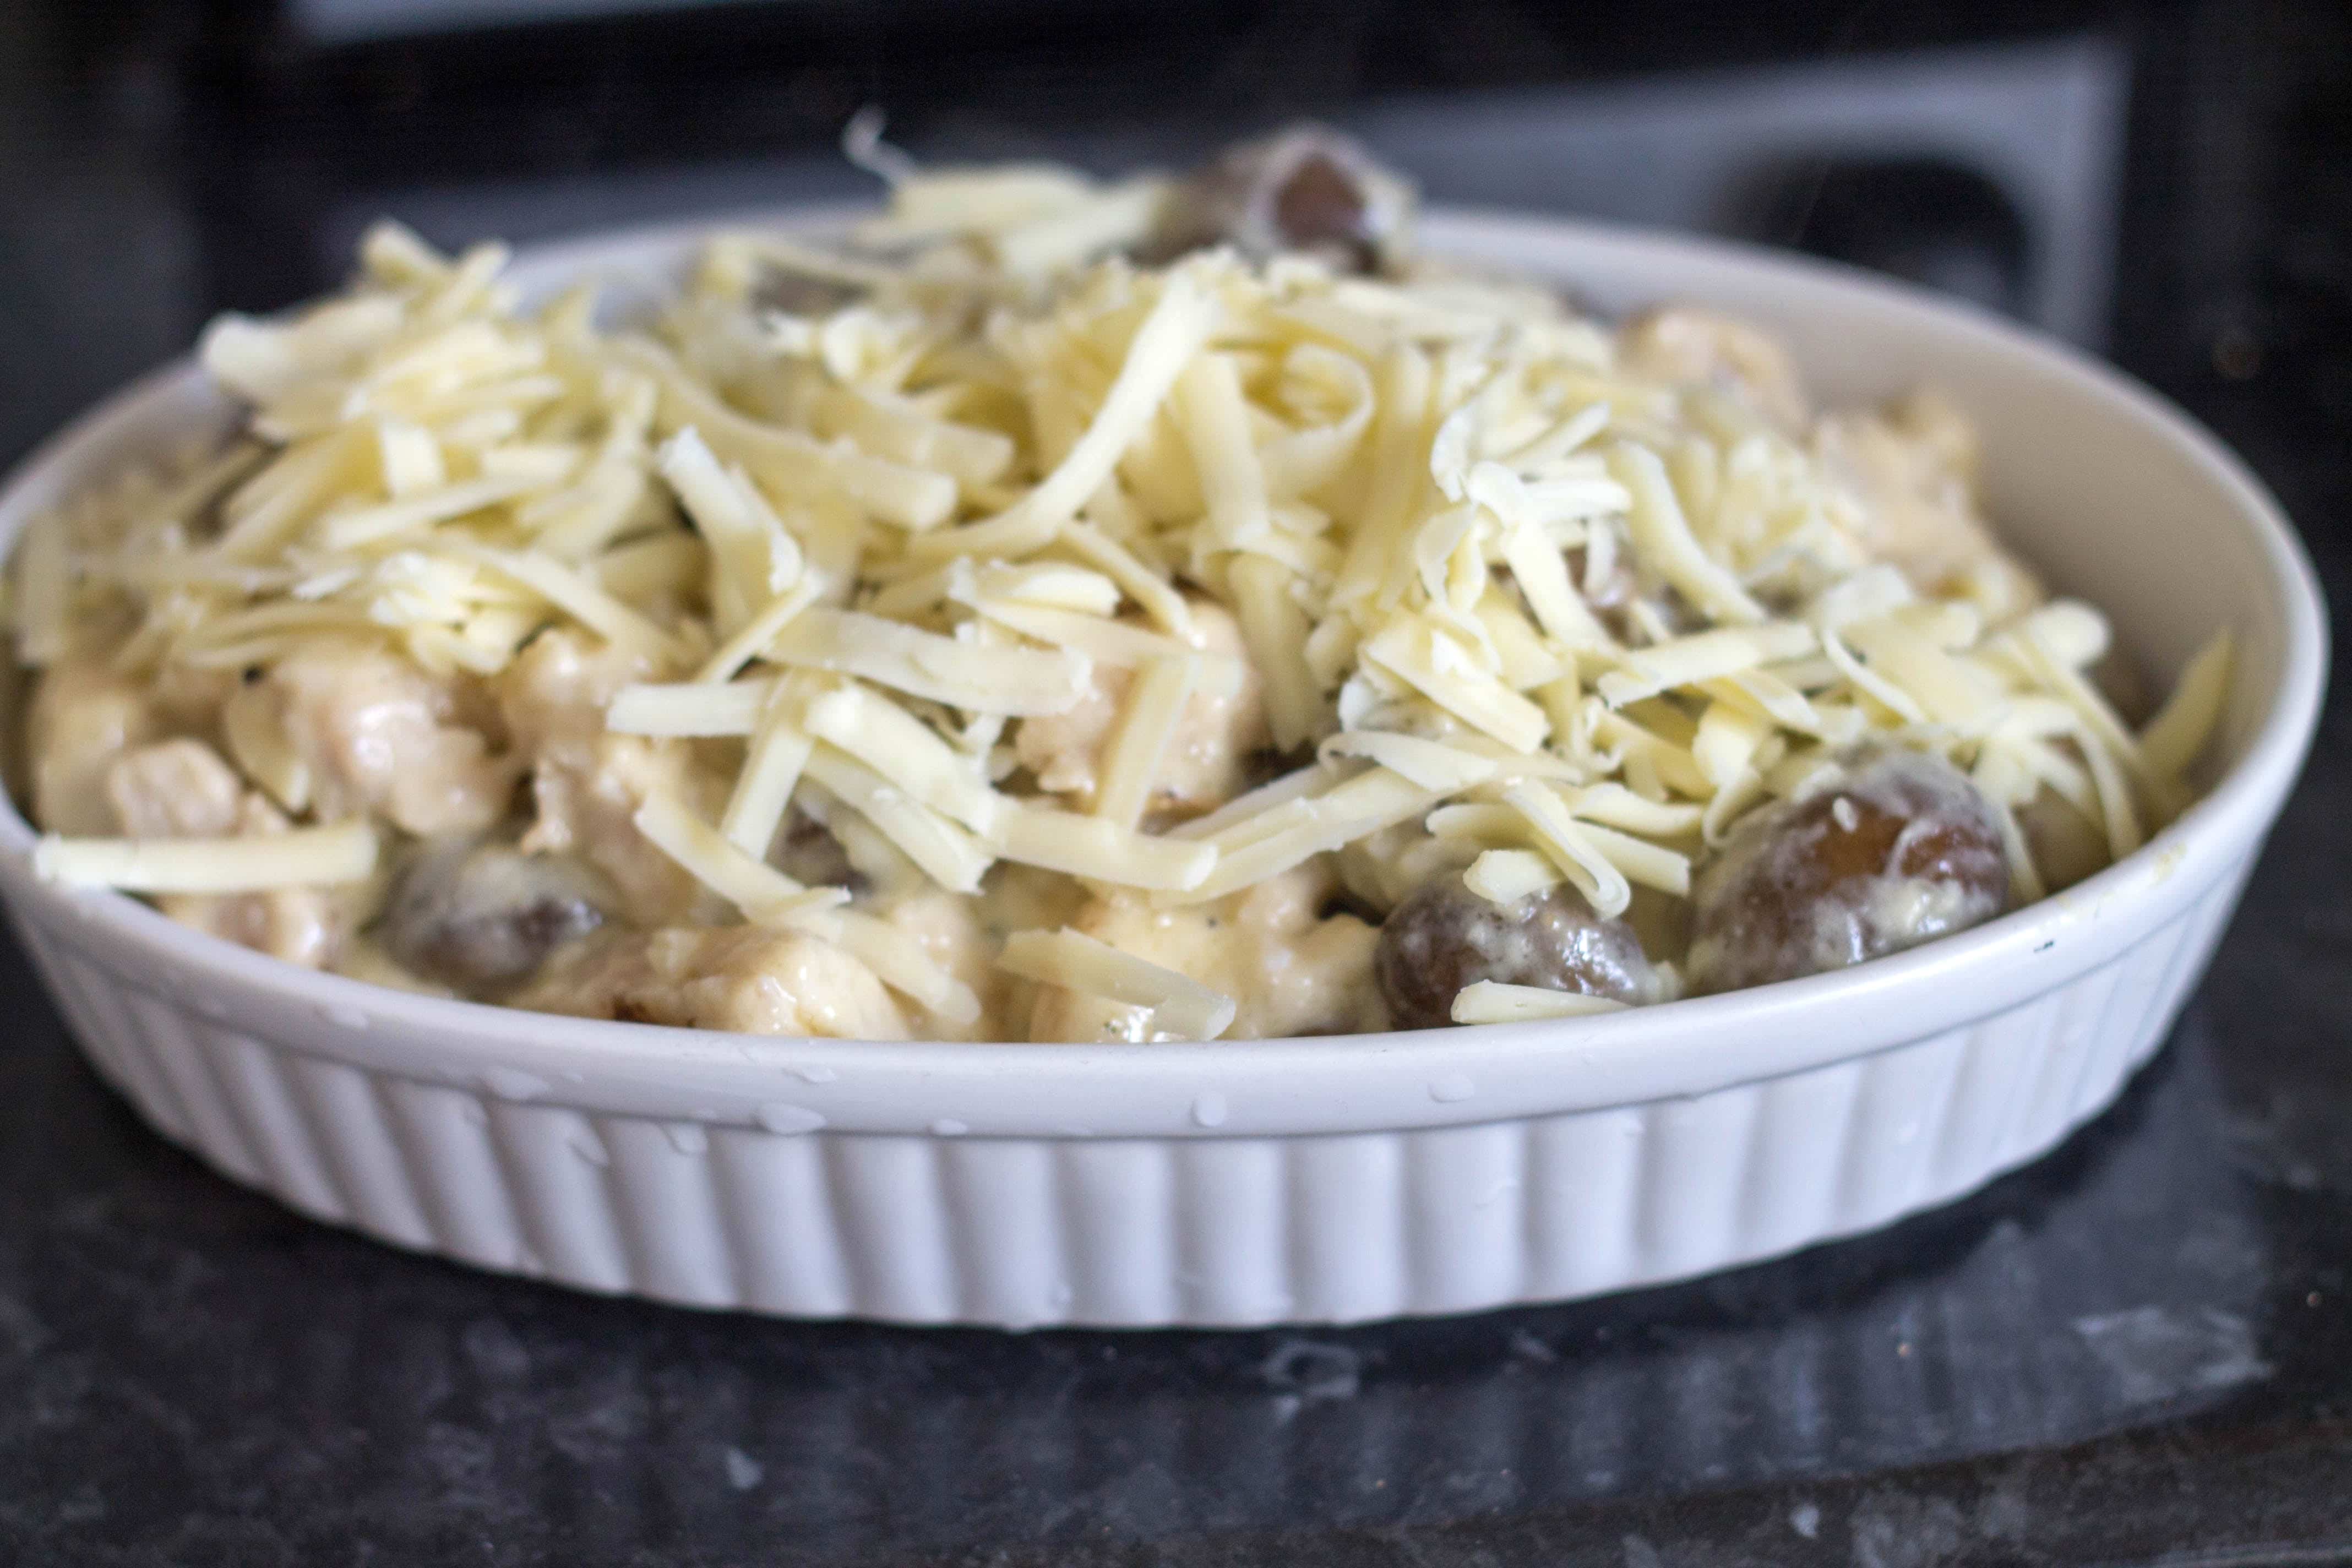 Cheesy Chicken & Mushroom Pie - Simple and delicious comfort food